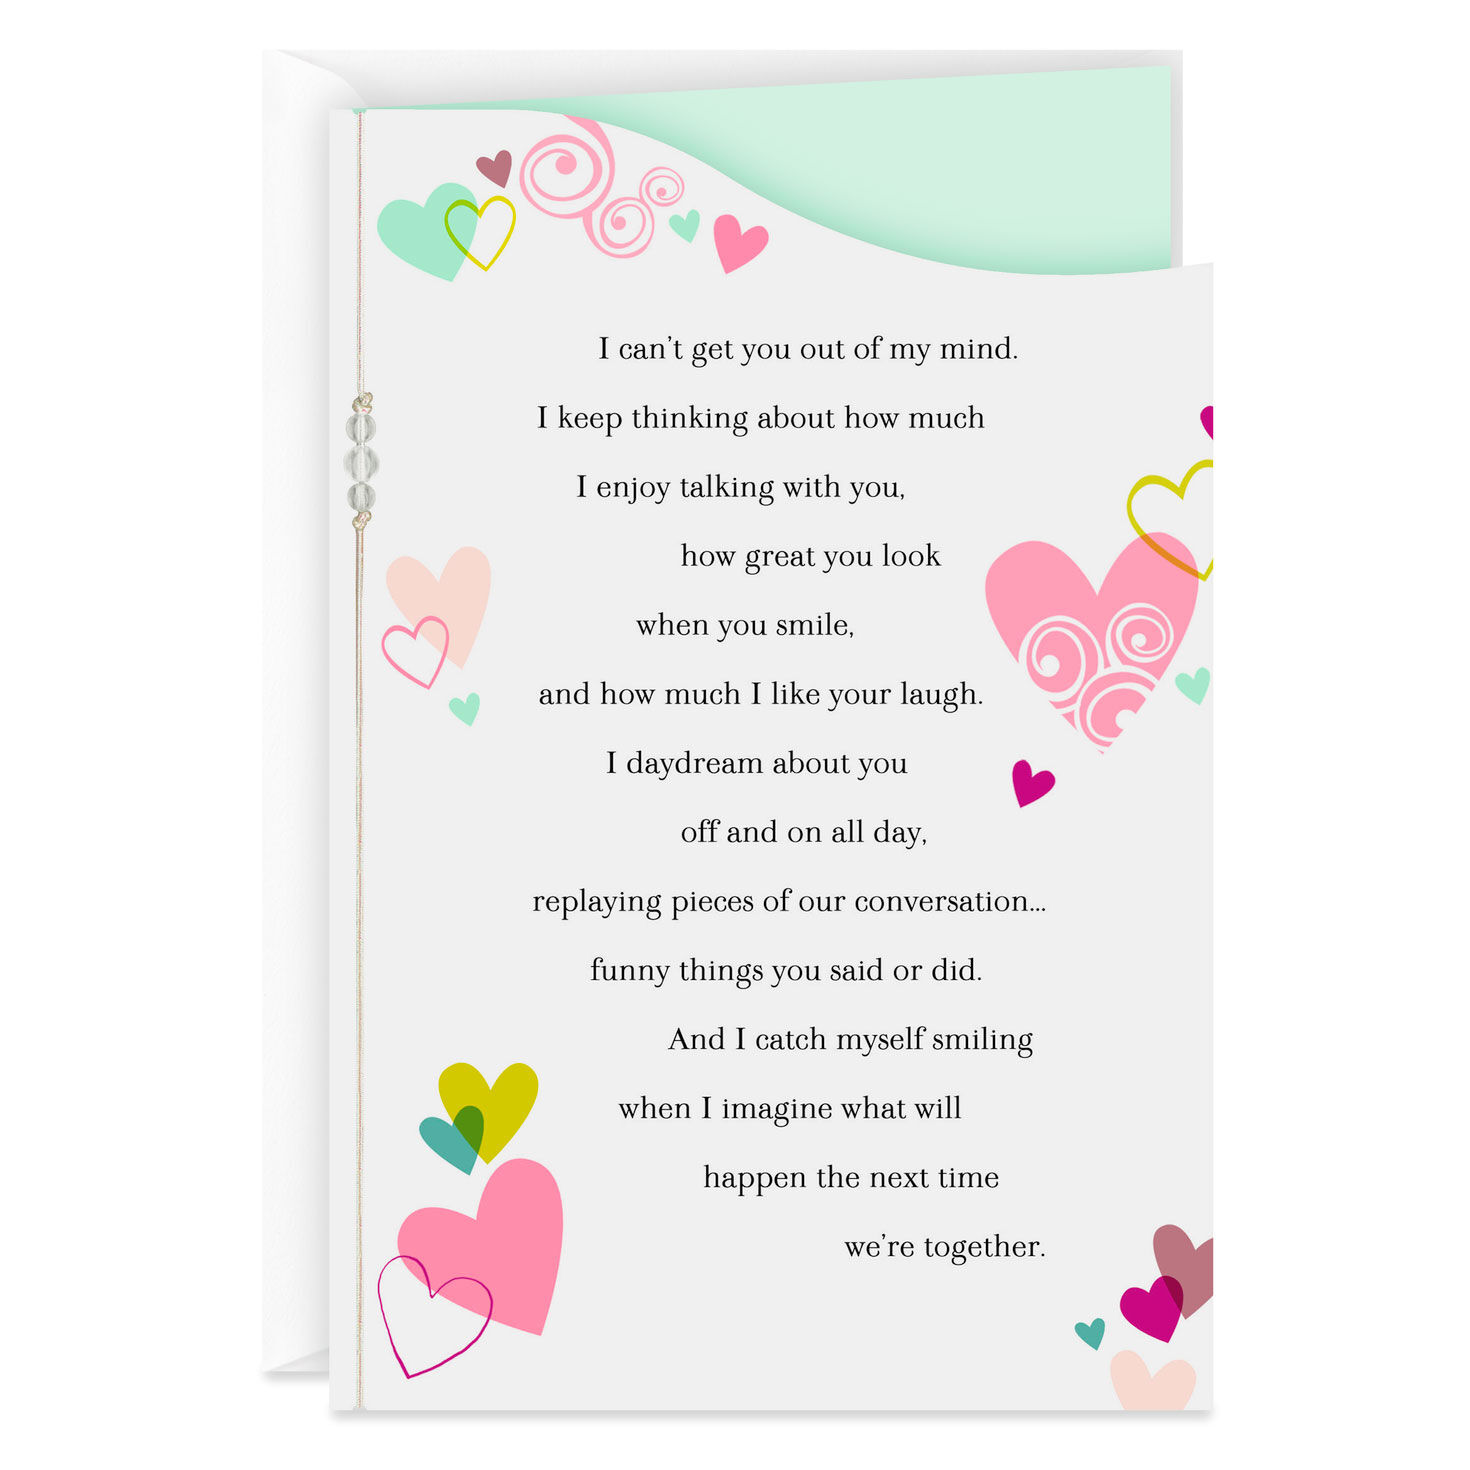 I LIKE YOU New Romance New Relationship "Between You & Me" 29B LOVE Card 